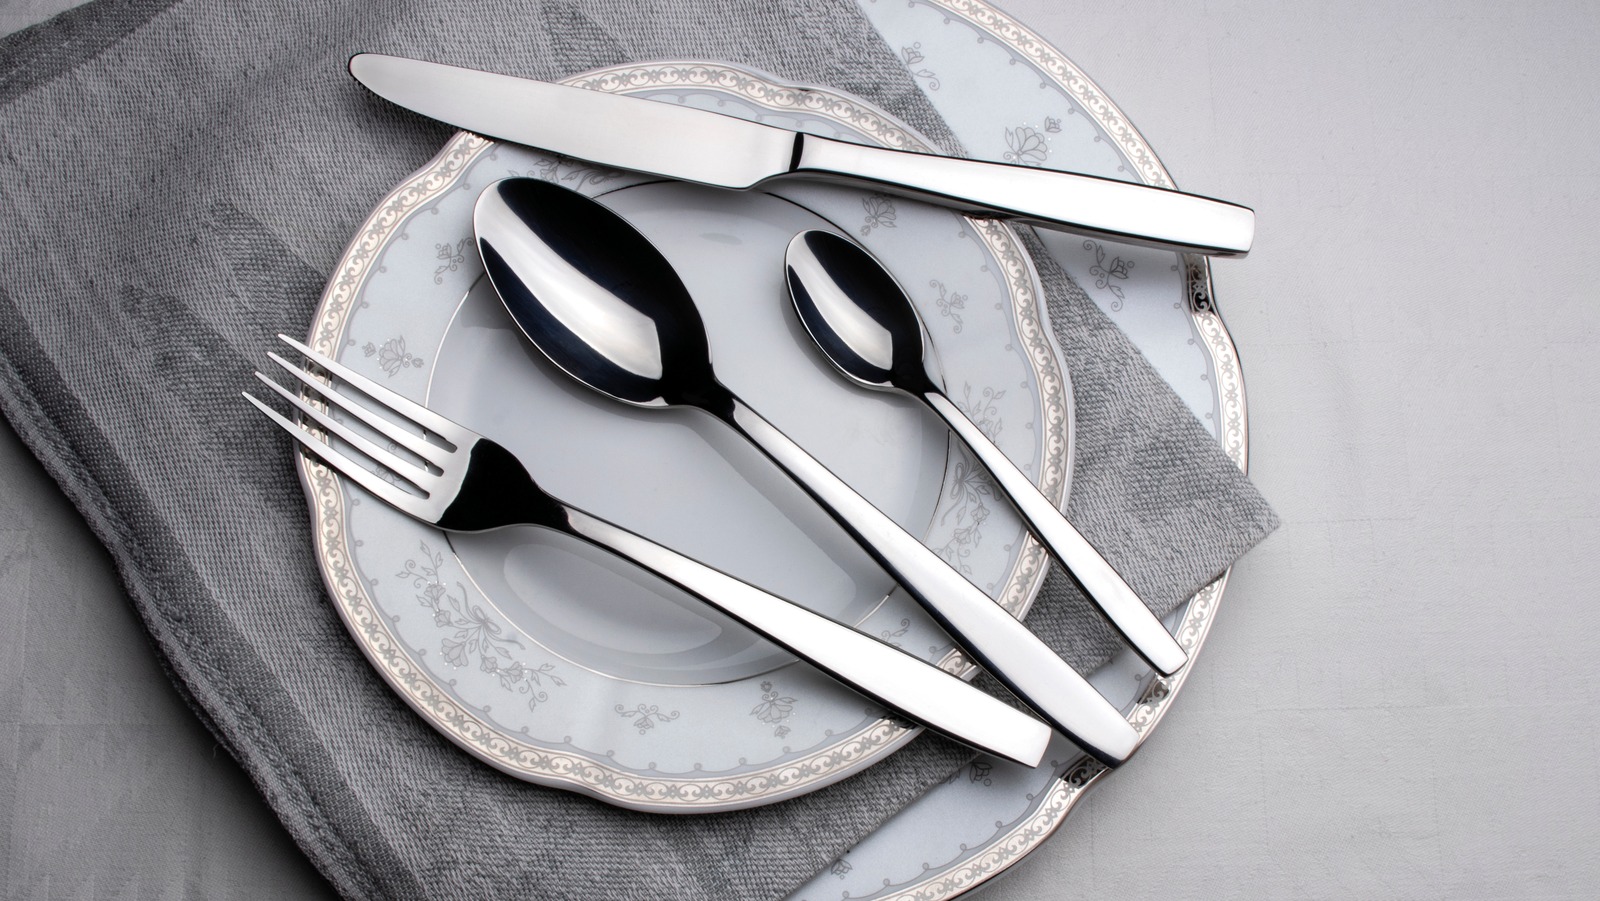 The 11 Best, Most Stylish Sets of Flatware